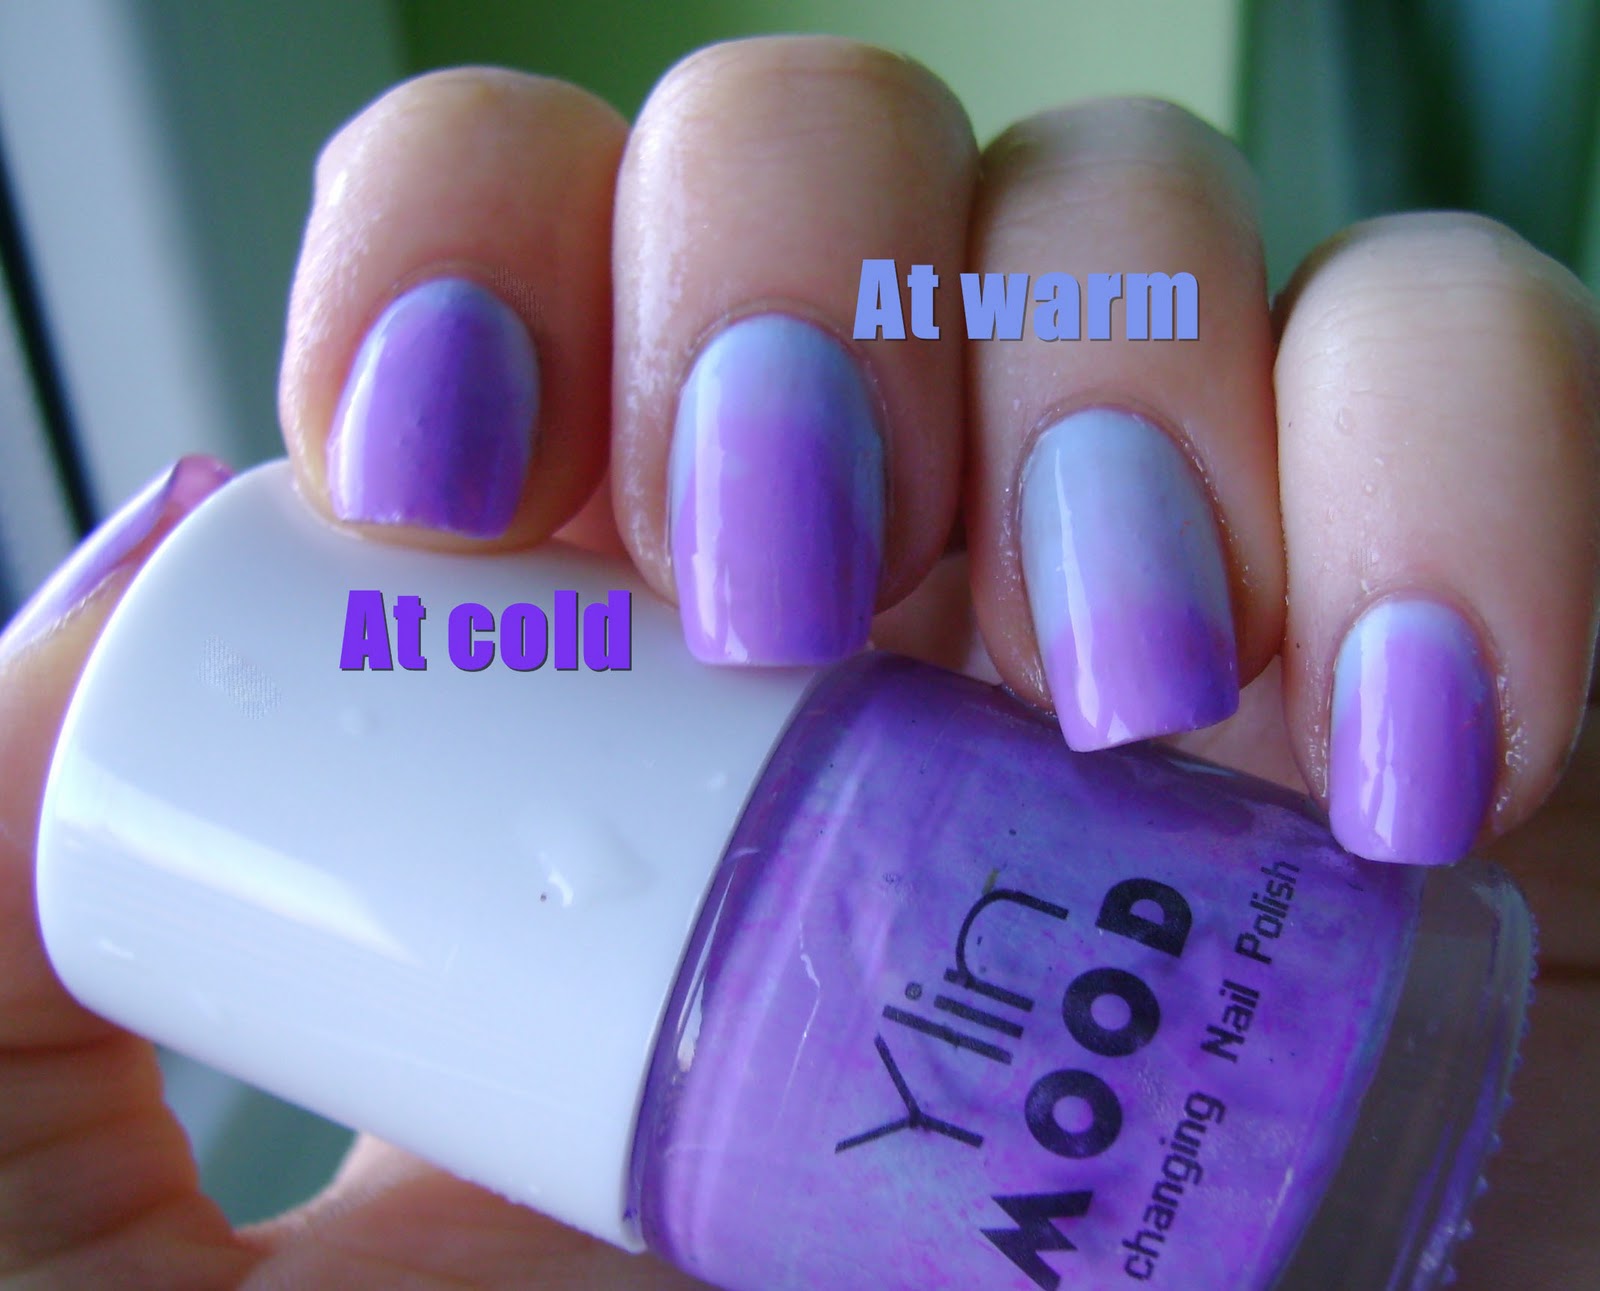 3. Sephora by OPI Color Changing Nail Polish - wide 3